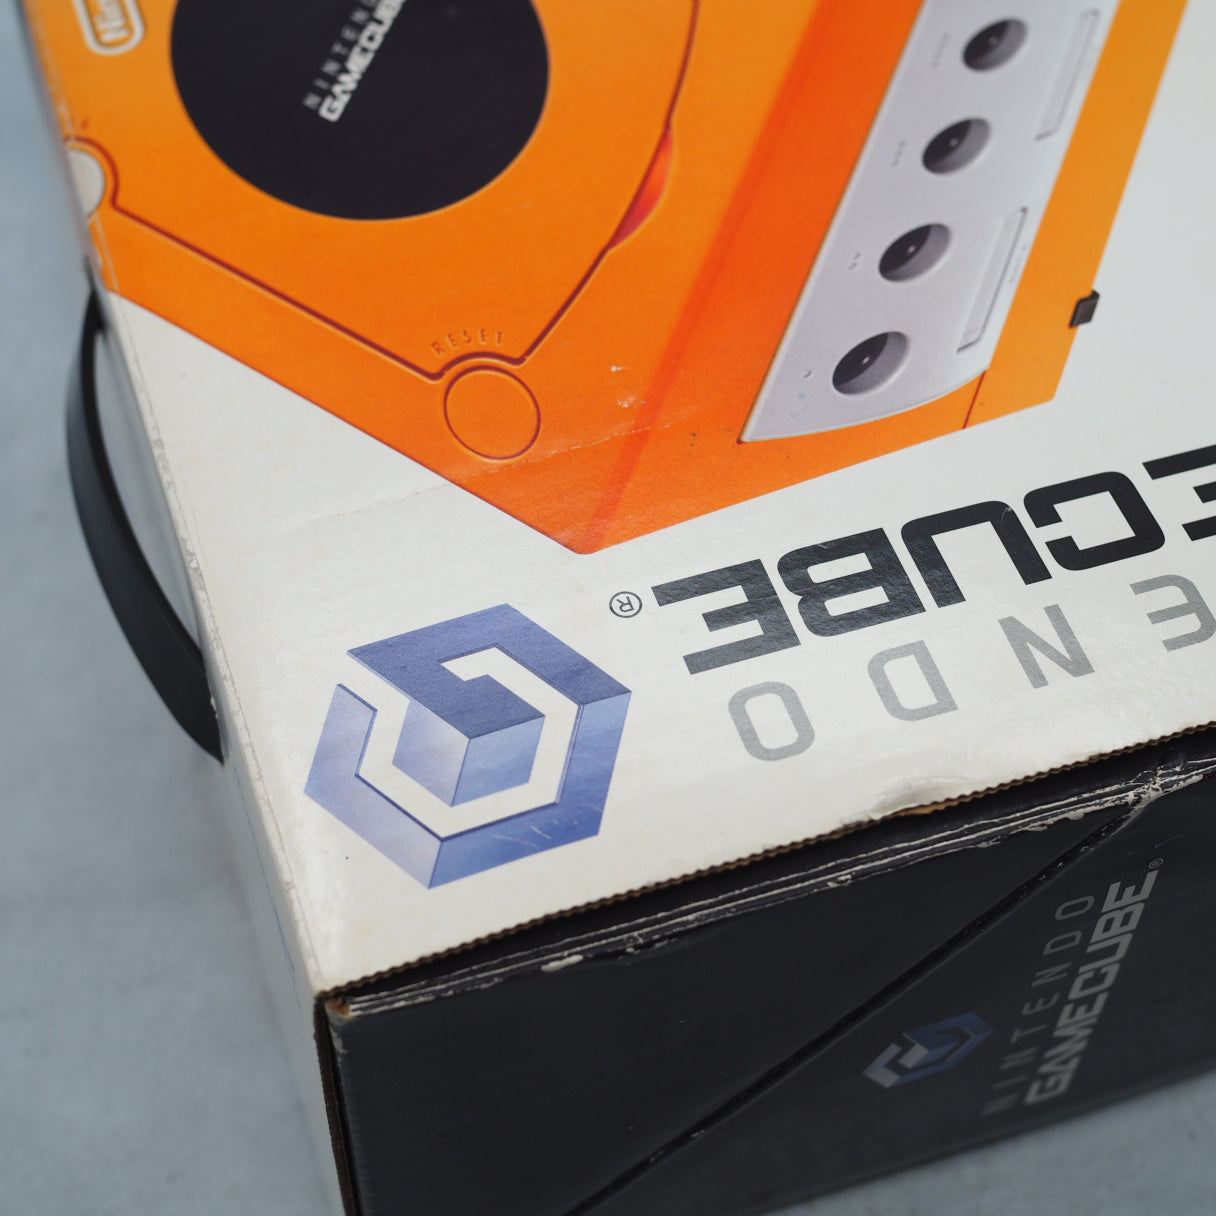 Nintendo GameCube Console System Orange Boxed DOL-101 [Serial number match]